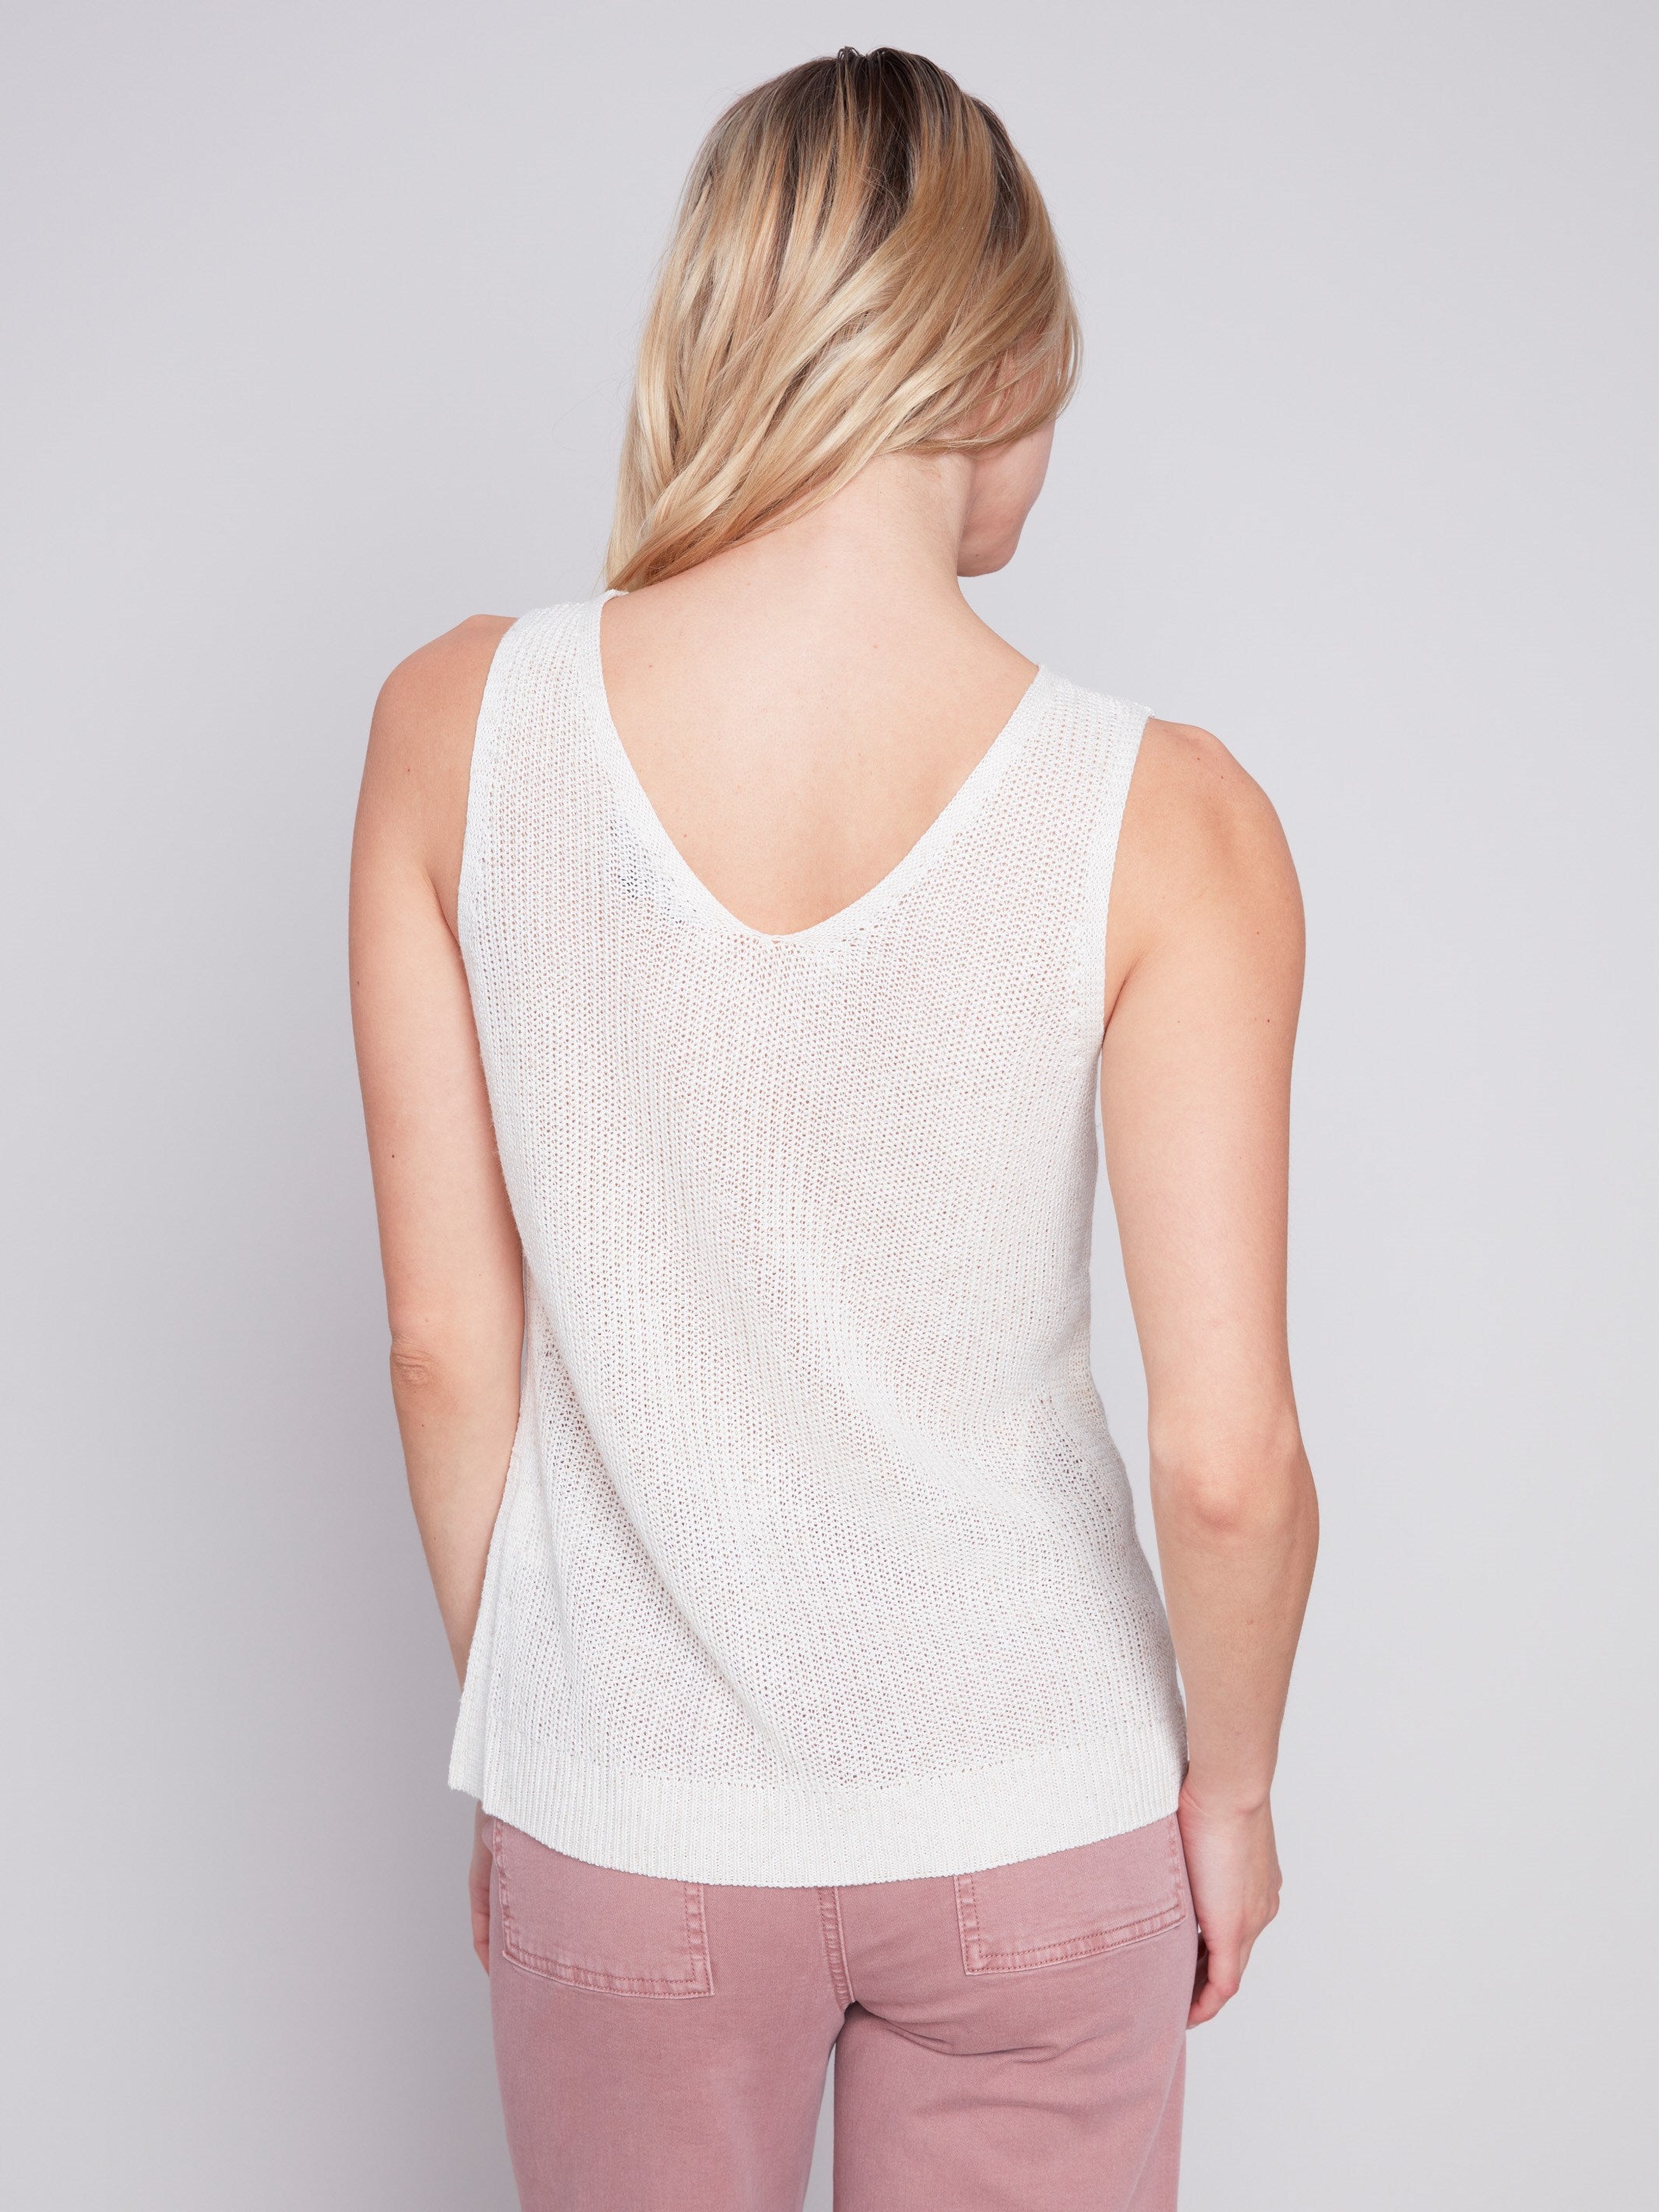 Cold-Dye Knit Cami - Natural - Charlie B Collection Canada - Image 2